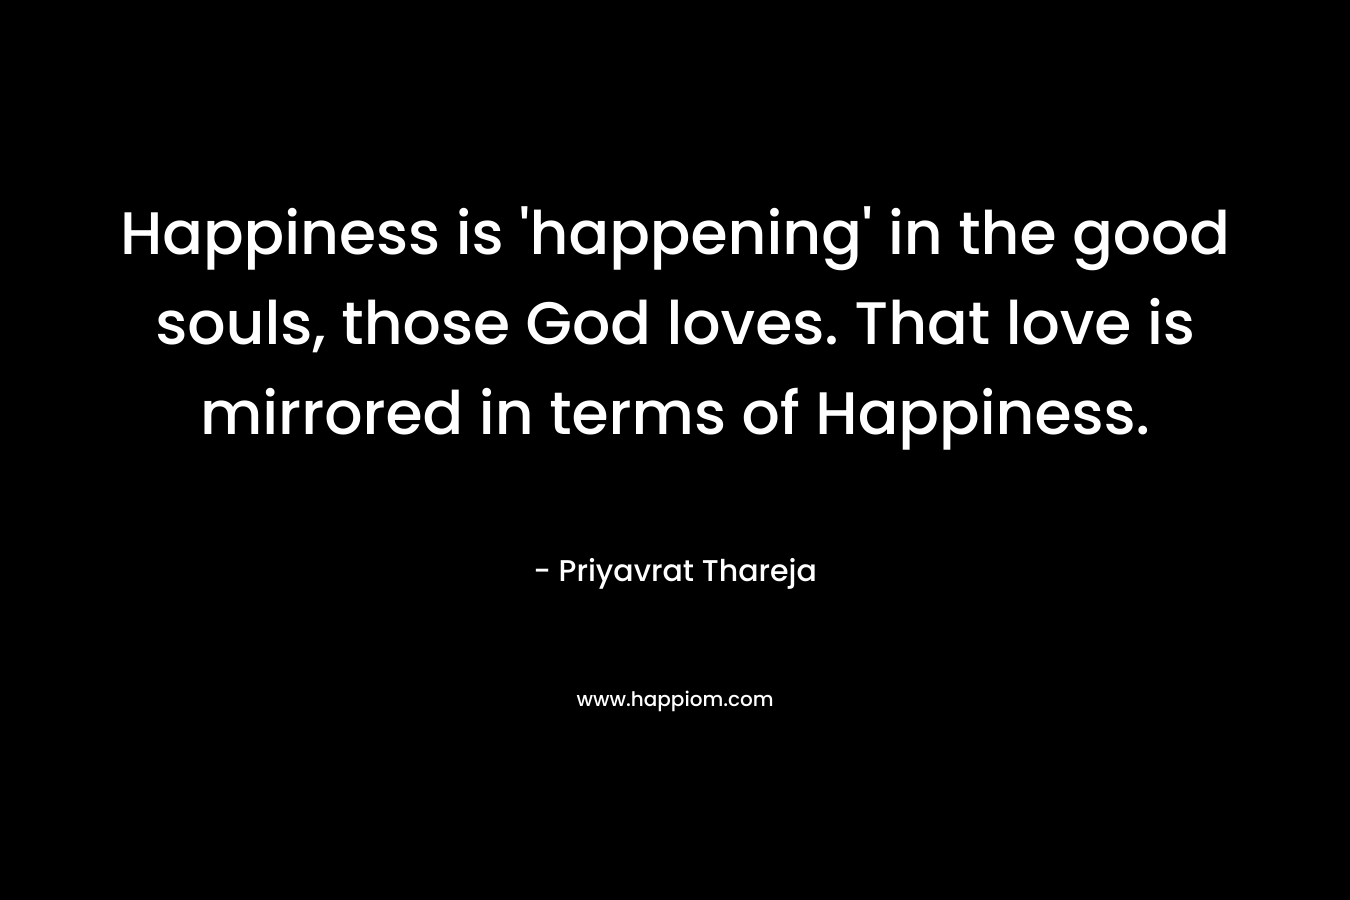 Happiness is 'happening' in the good souls, those God loves. That love is mirrored in terms of Happiness.